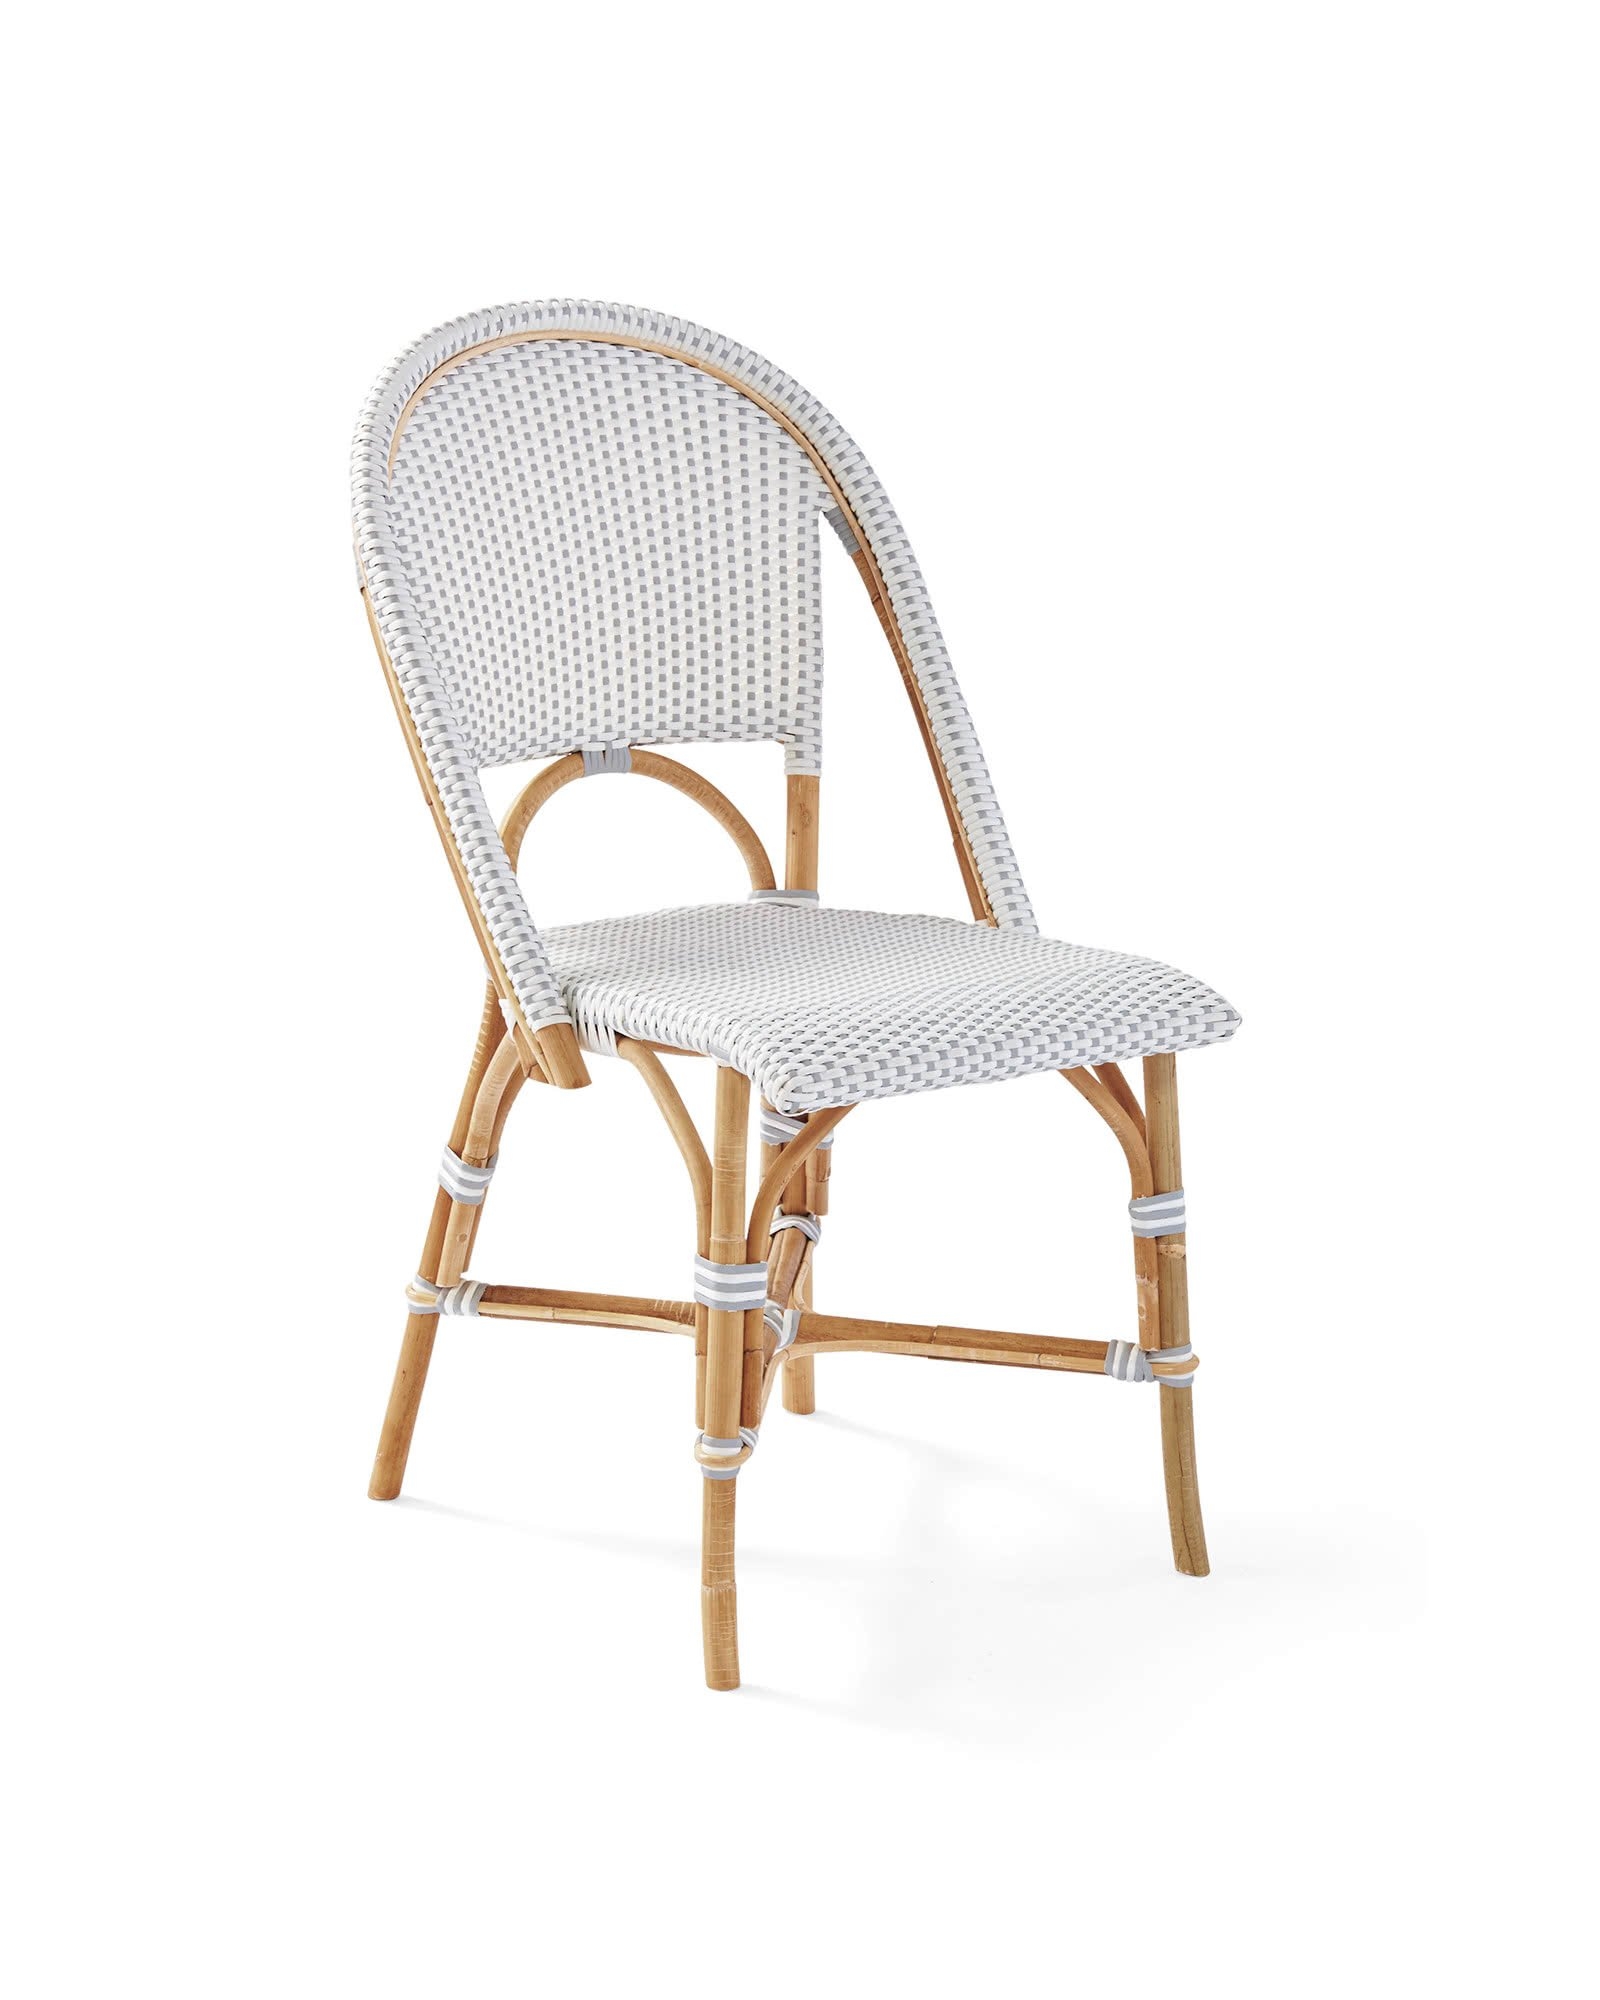 Riviera Rattan Dining Chair - Image 0